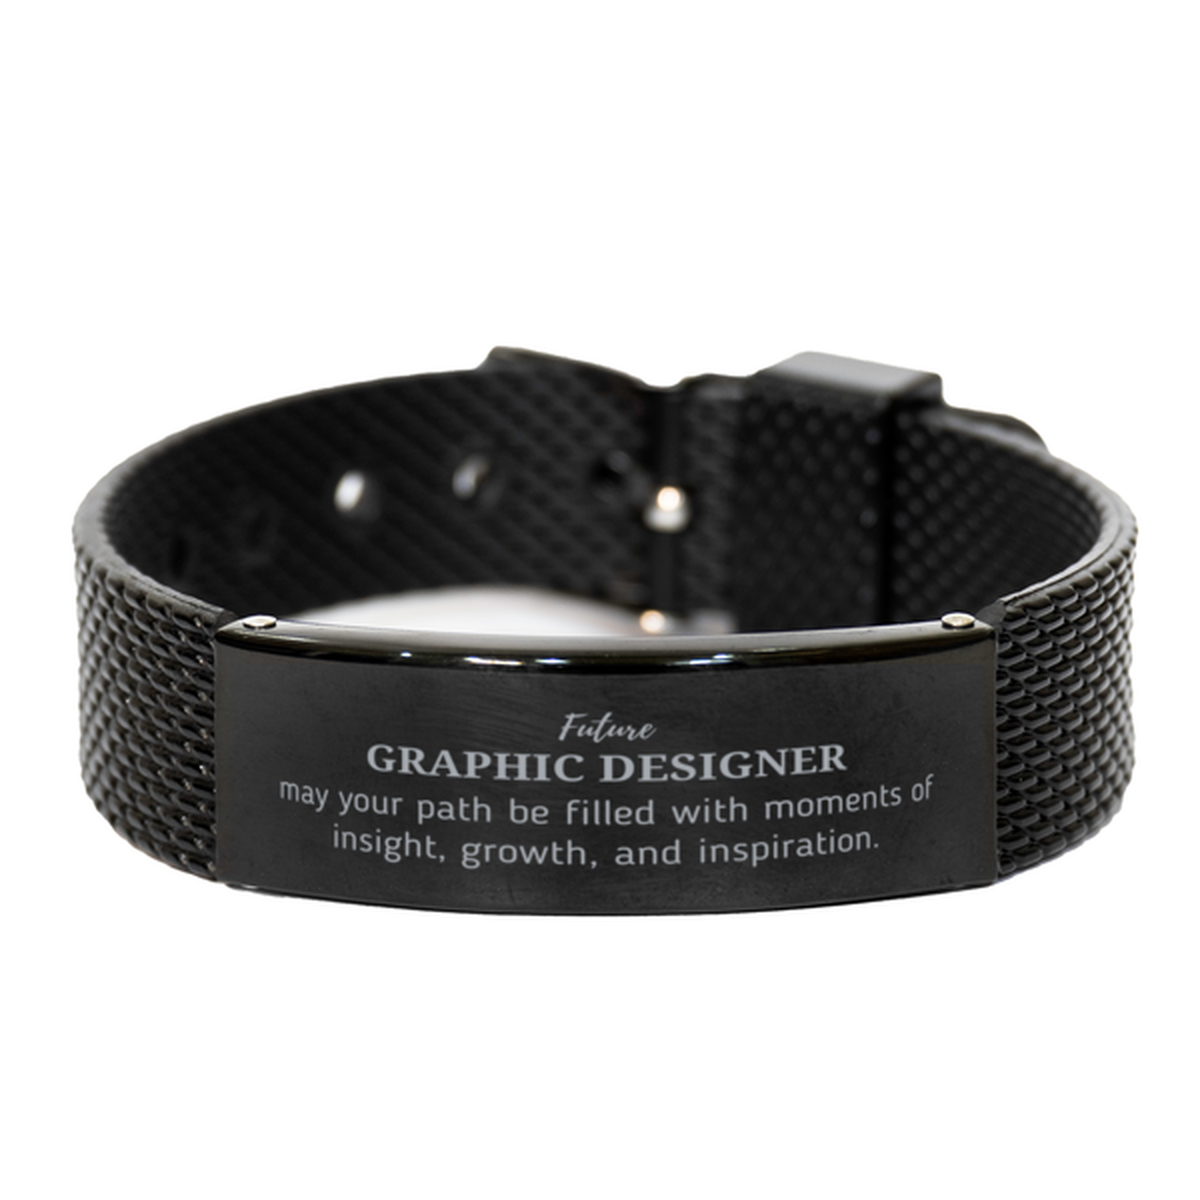 Future Graphic Designer Gifts, May your path be filled with moments of insight, Graduation Gifts for New Graphic Designer, Christmas Unique Black Shark Mesh Bracelet For Men, Women, Friends